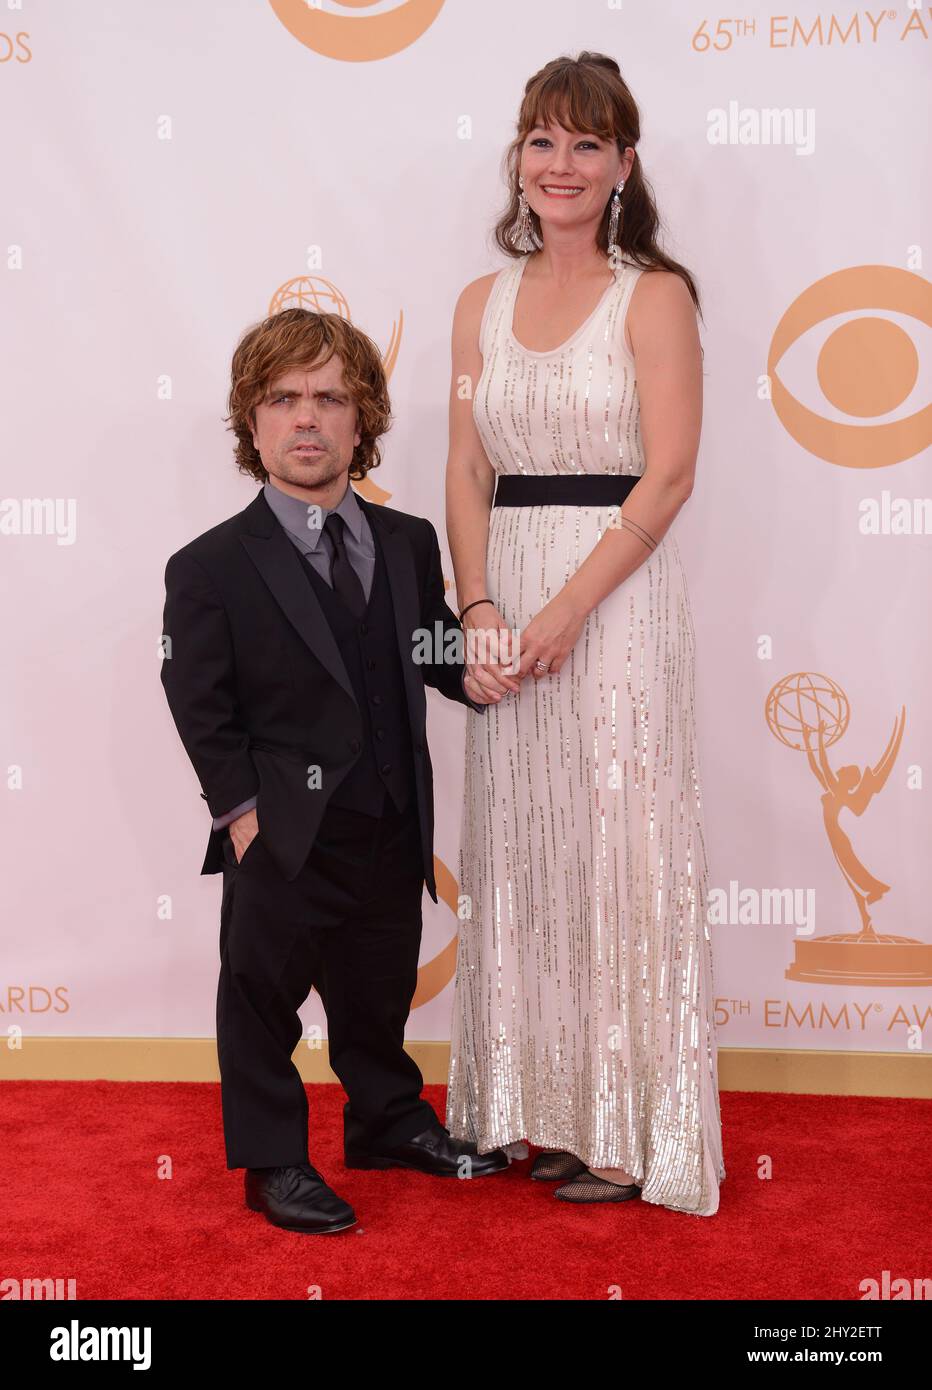 Peter Dinklage and Erica Schmidt attends the 65th Annual Primetime Emmy Awards held at the Nokia Theatre at L.A. Live, September 22, 2013 in Los Angeles. Stock Photo